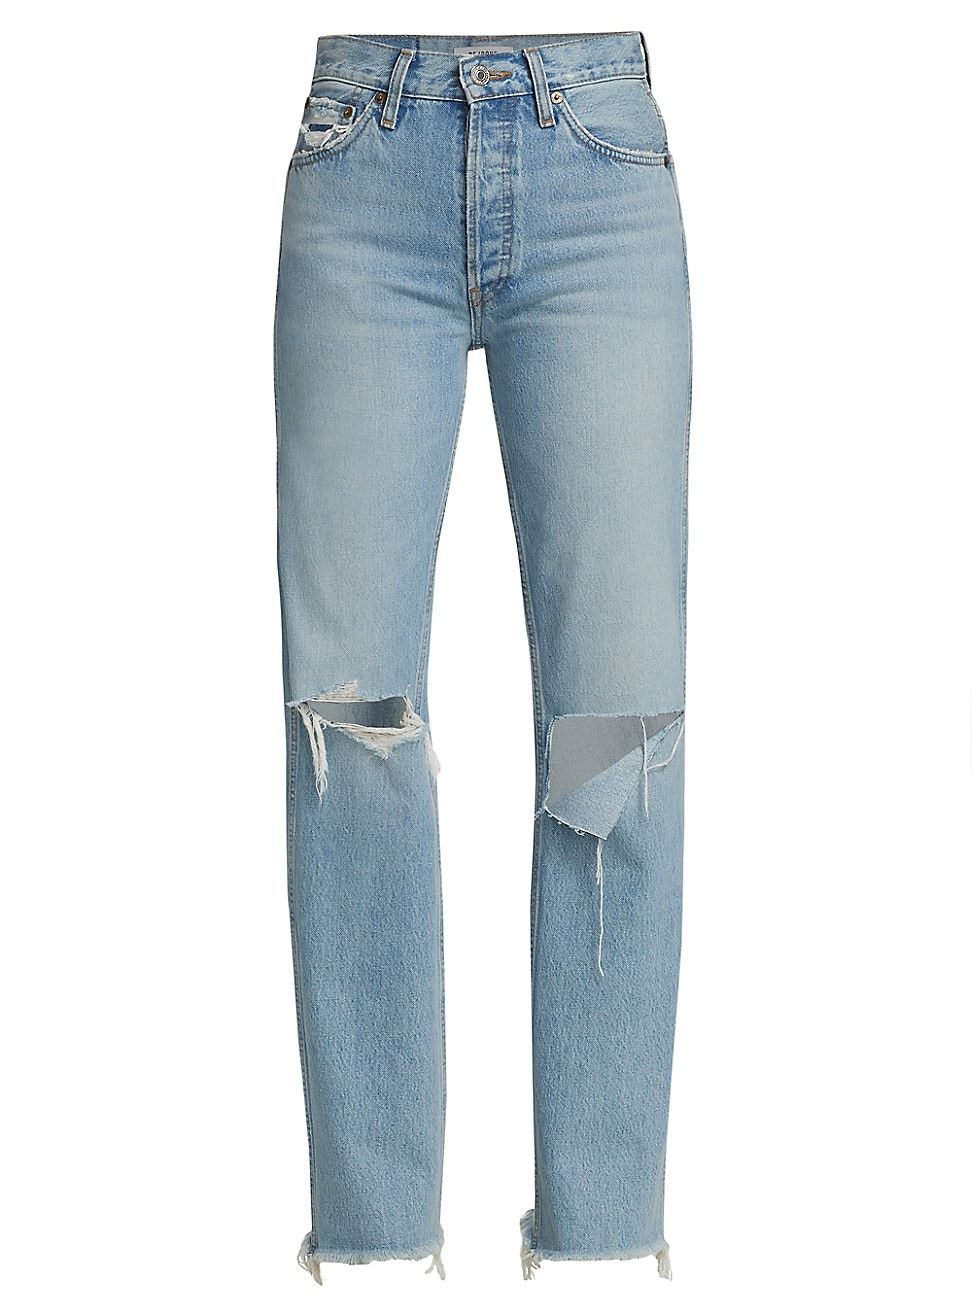 Women's 90s High-Rise Loose Straight Jeans - Breezy Indigo - Size 27 | Saks Fifth Avenue